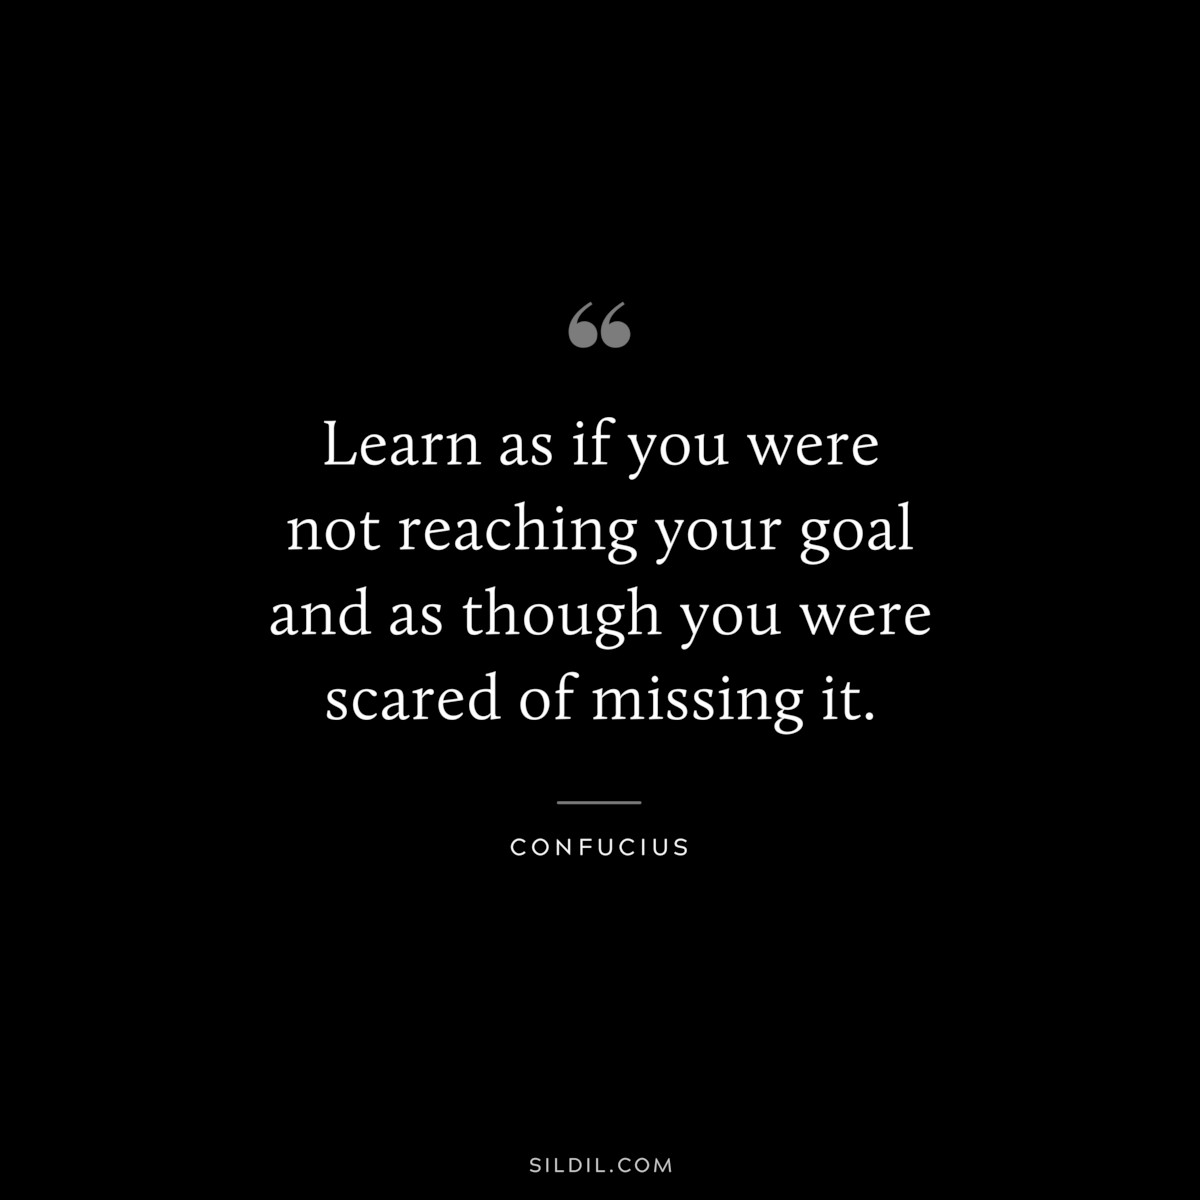 Learn as if you were not reaching your goal and as though you were scared of missing it. ― Confucius